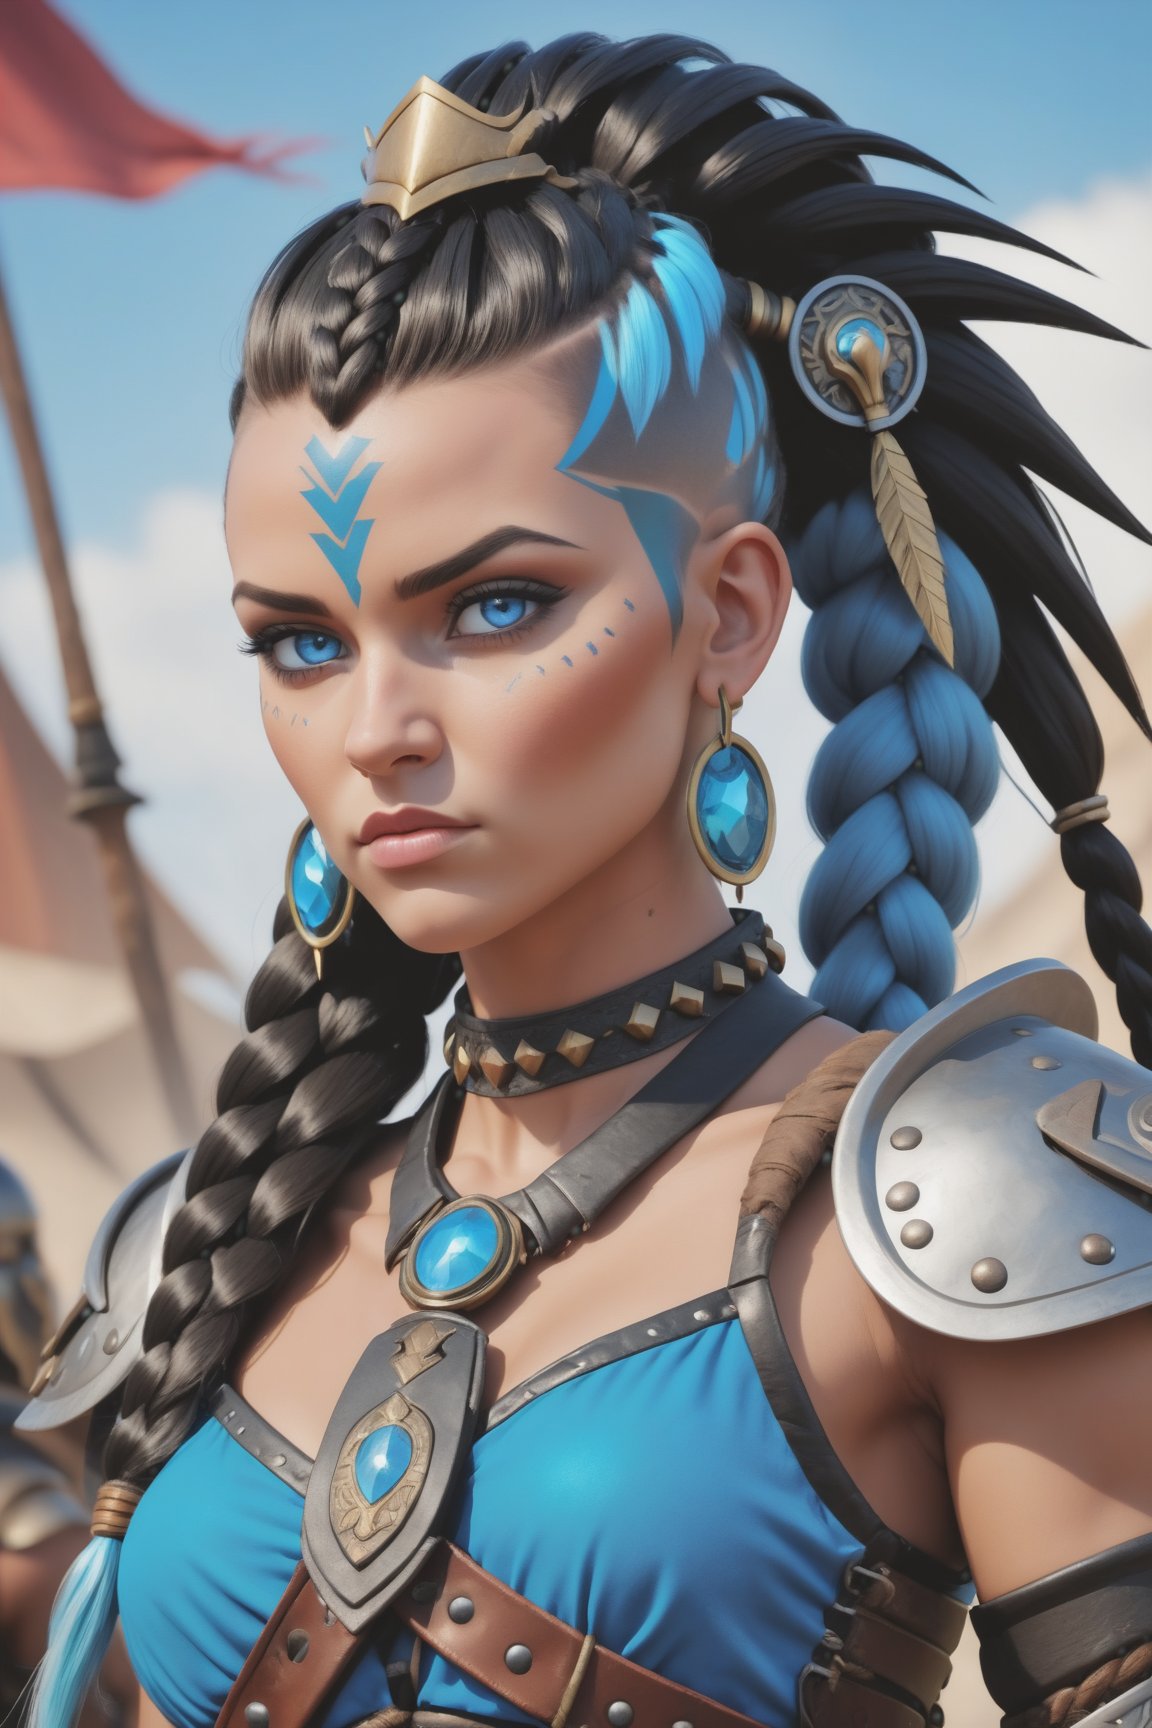 (best quality), (4K, HDR), barbarian junker queen, tall woman, black mohawk hair braids, strong body, bright blue eyes, (different camera angles), fantasy style armor and clothing, fantasy, vibrant colors, 